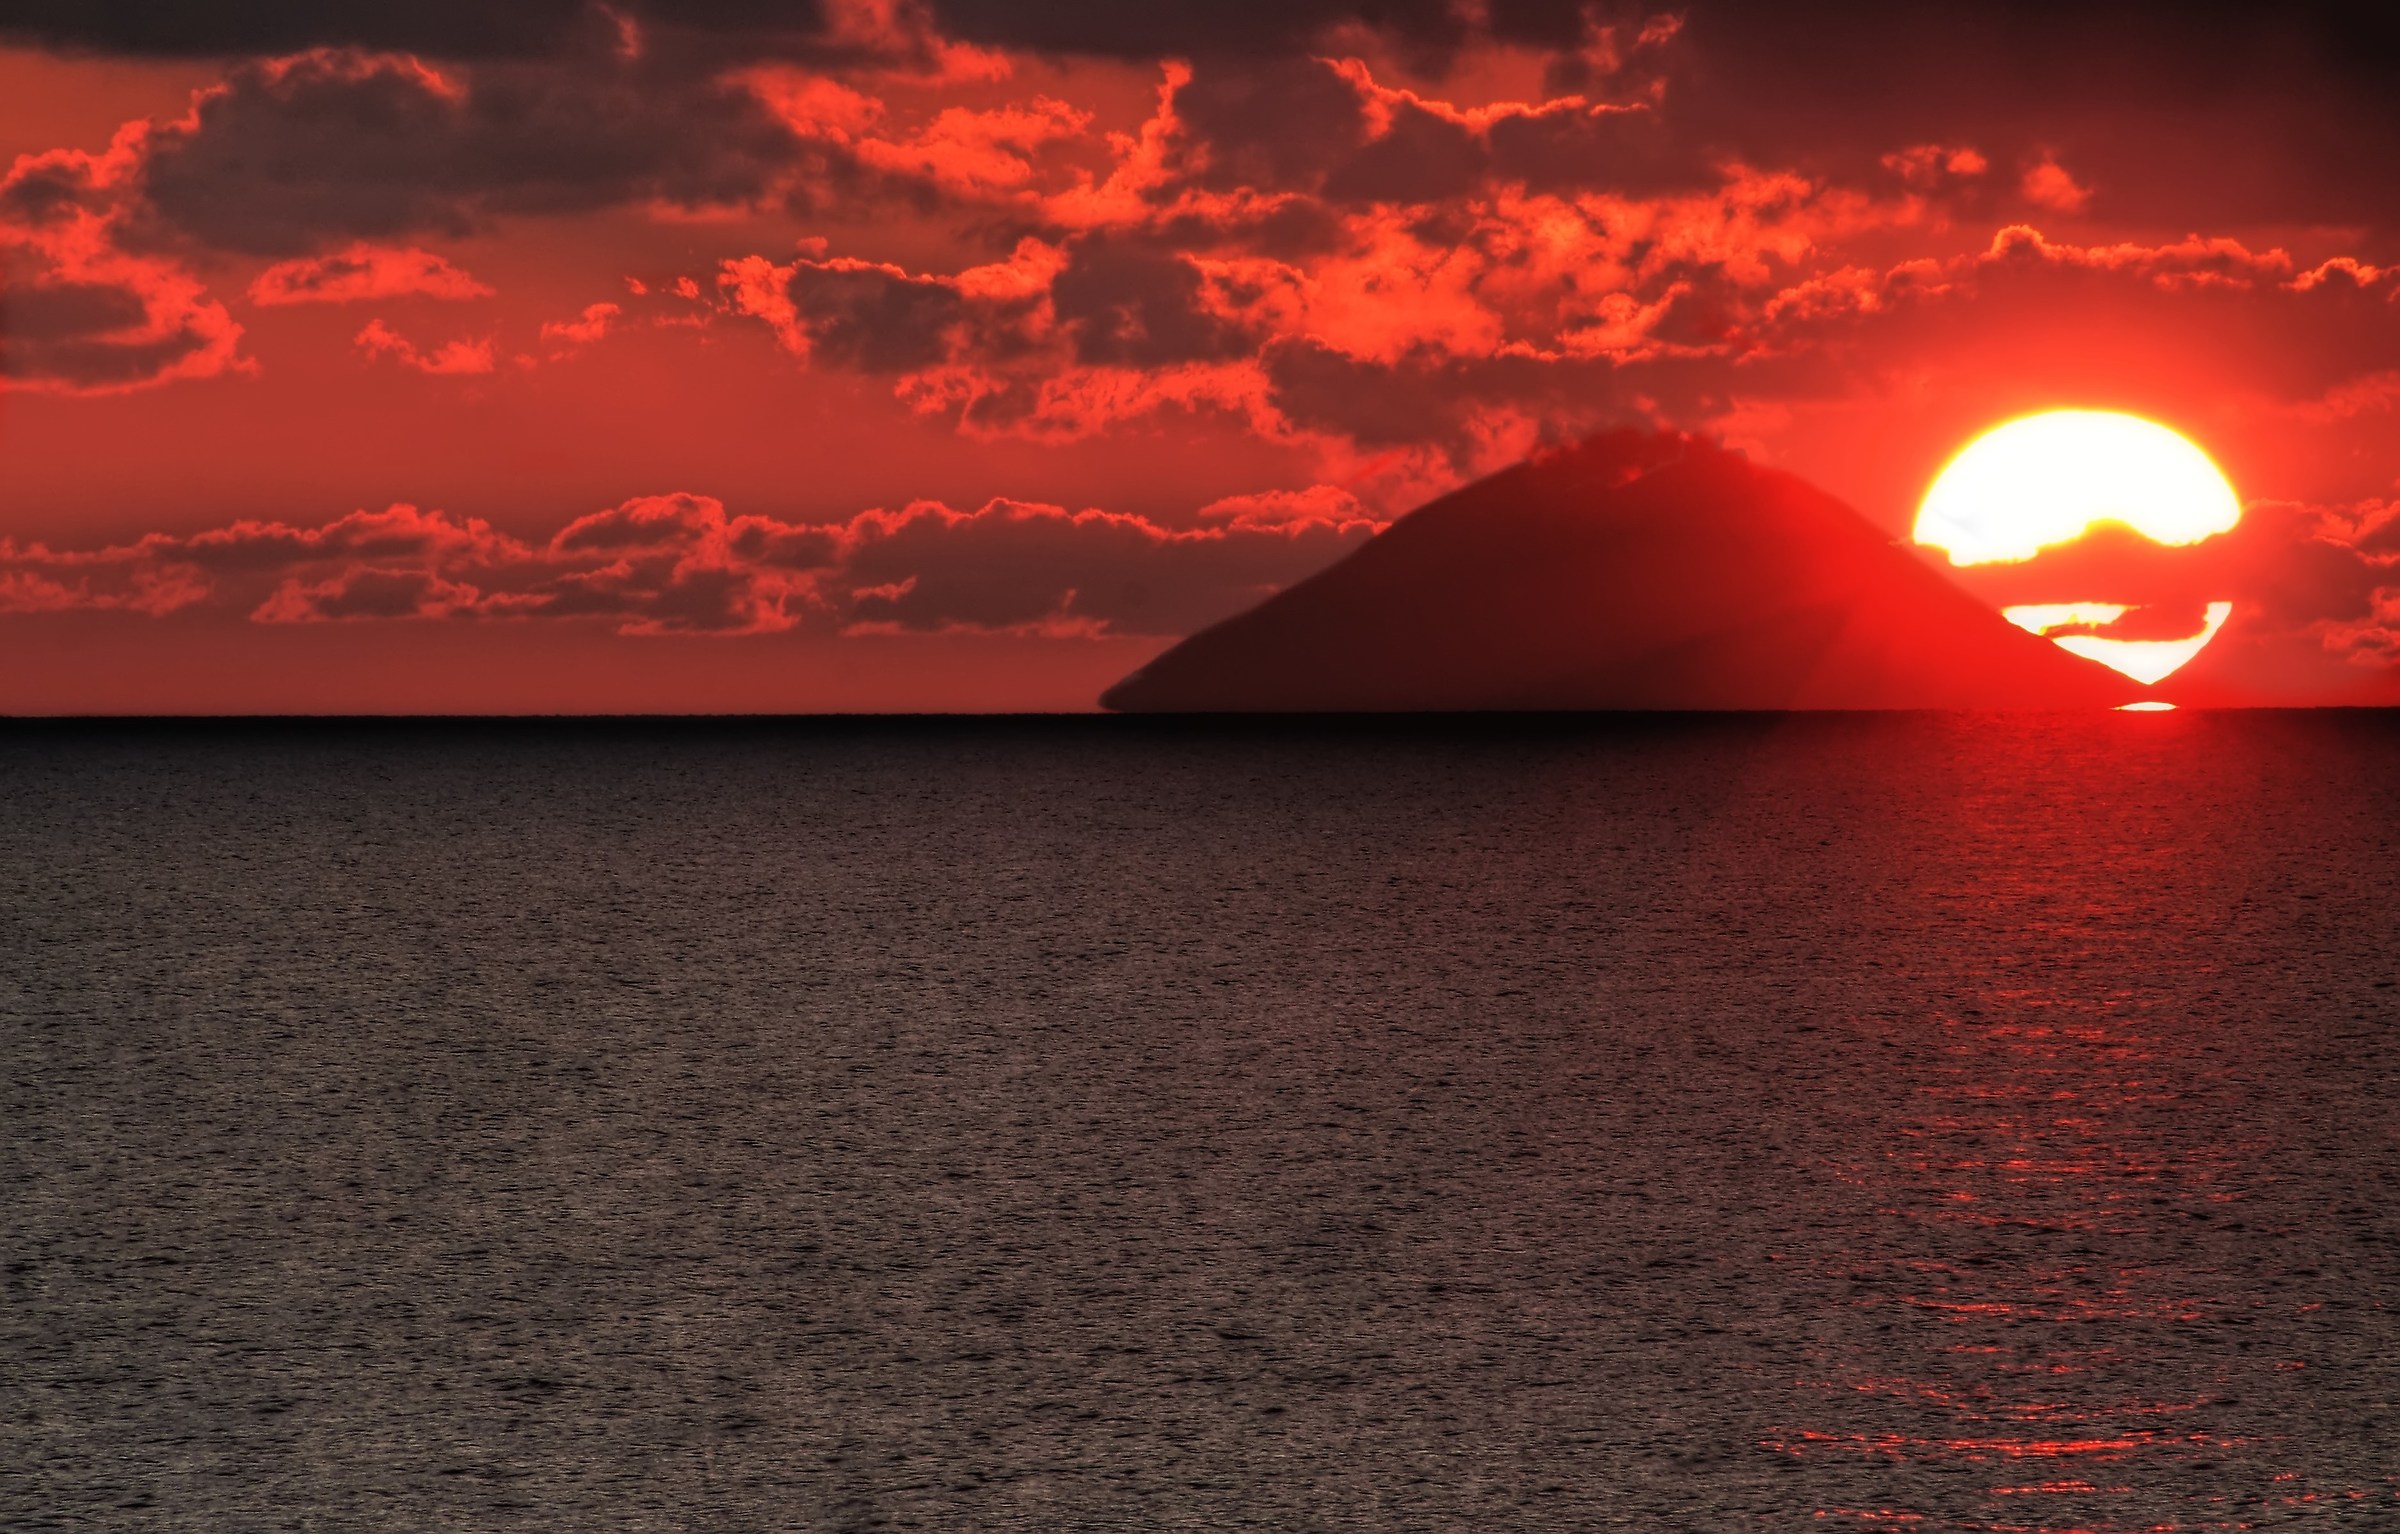 the volcano and the sunset...